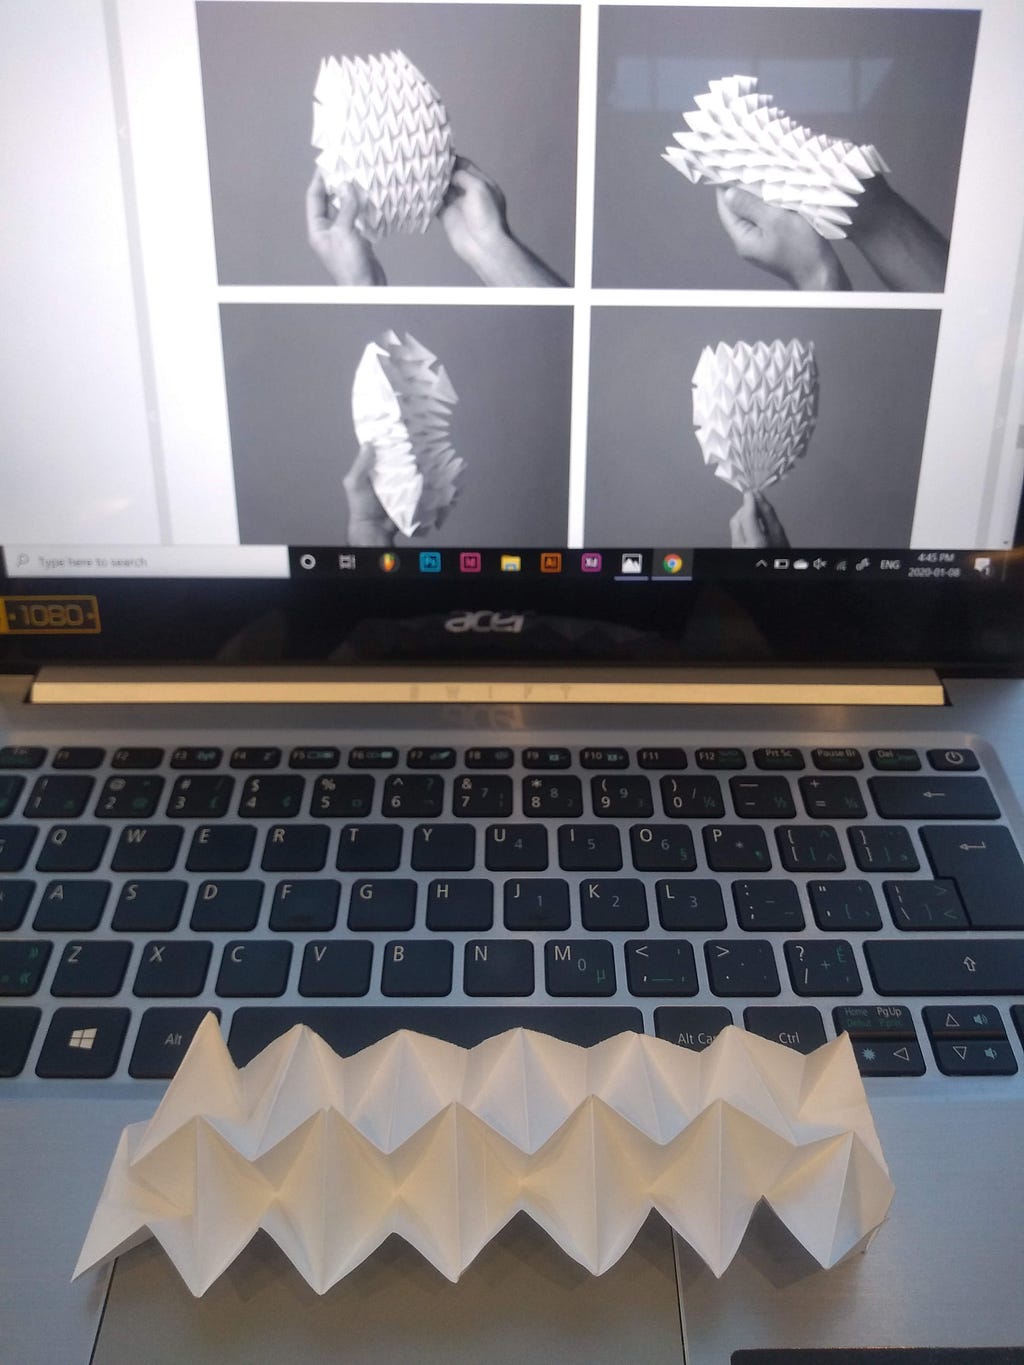 A laptop showing an intricate origami fold, and an actual origami sample